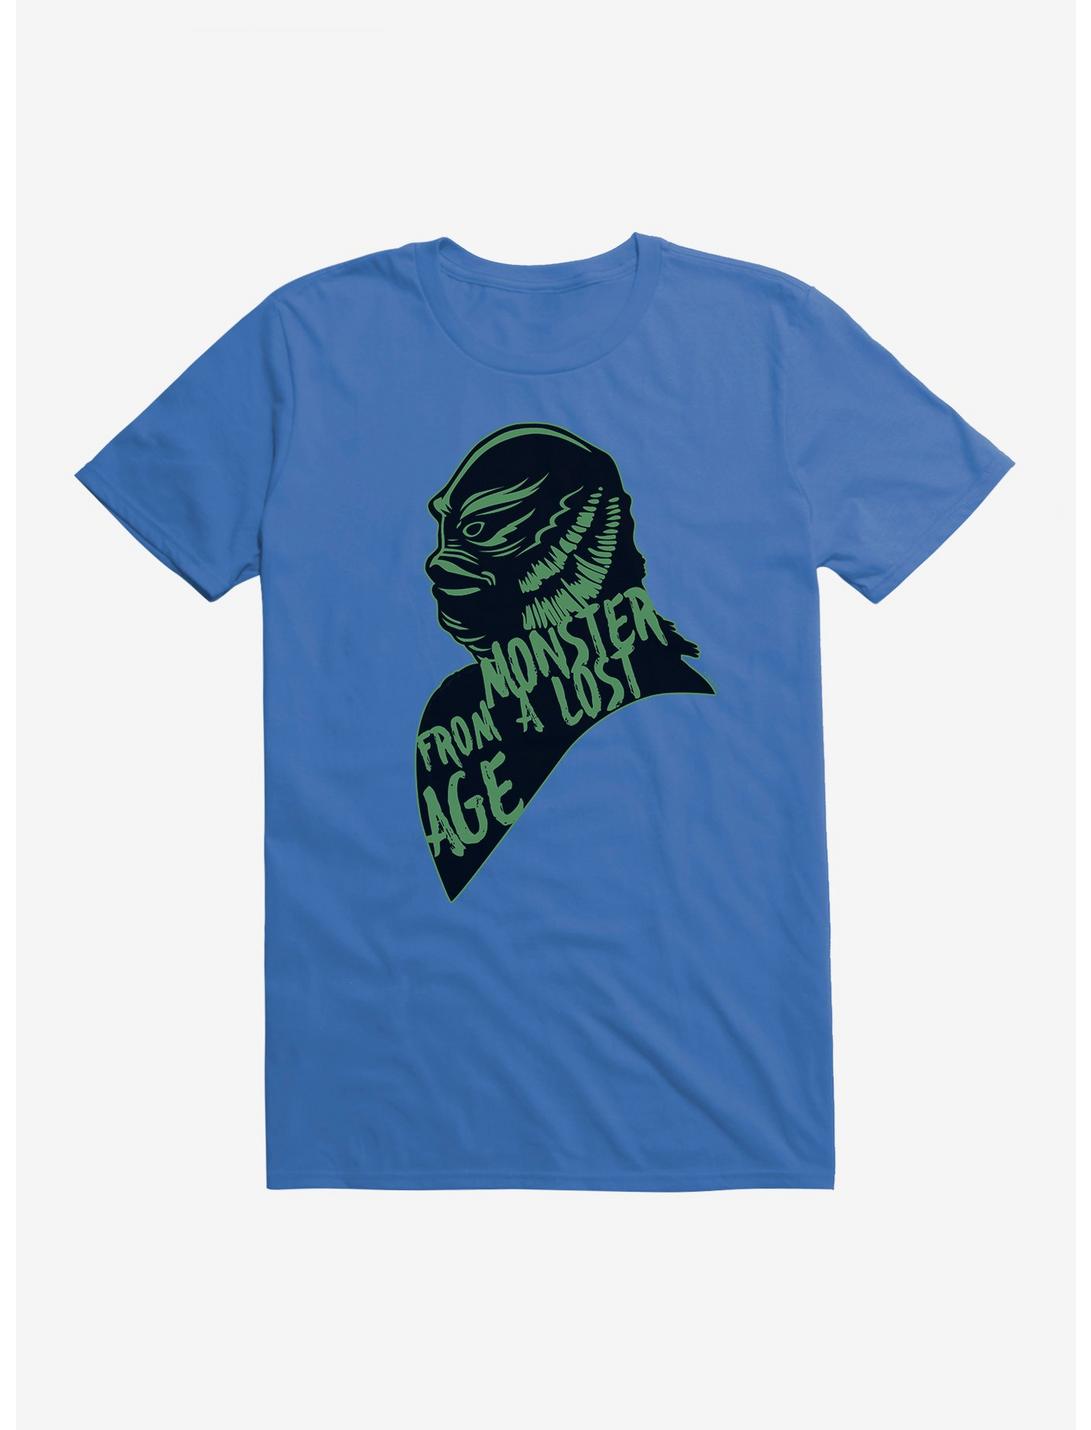 Universal Monsters Creature From The Black Lagoon Monster From A Lost Age T-Shirt, ROYAL BLUE, hi-res